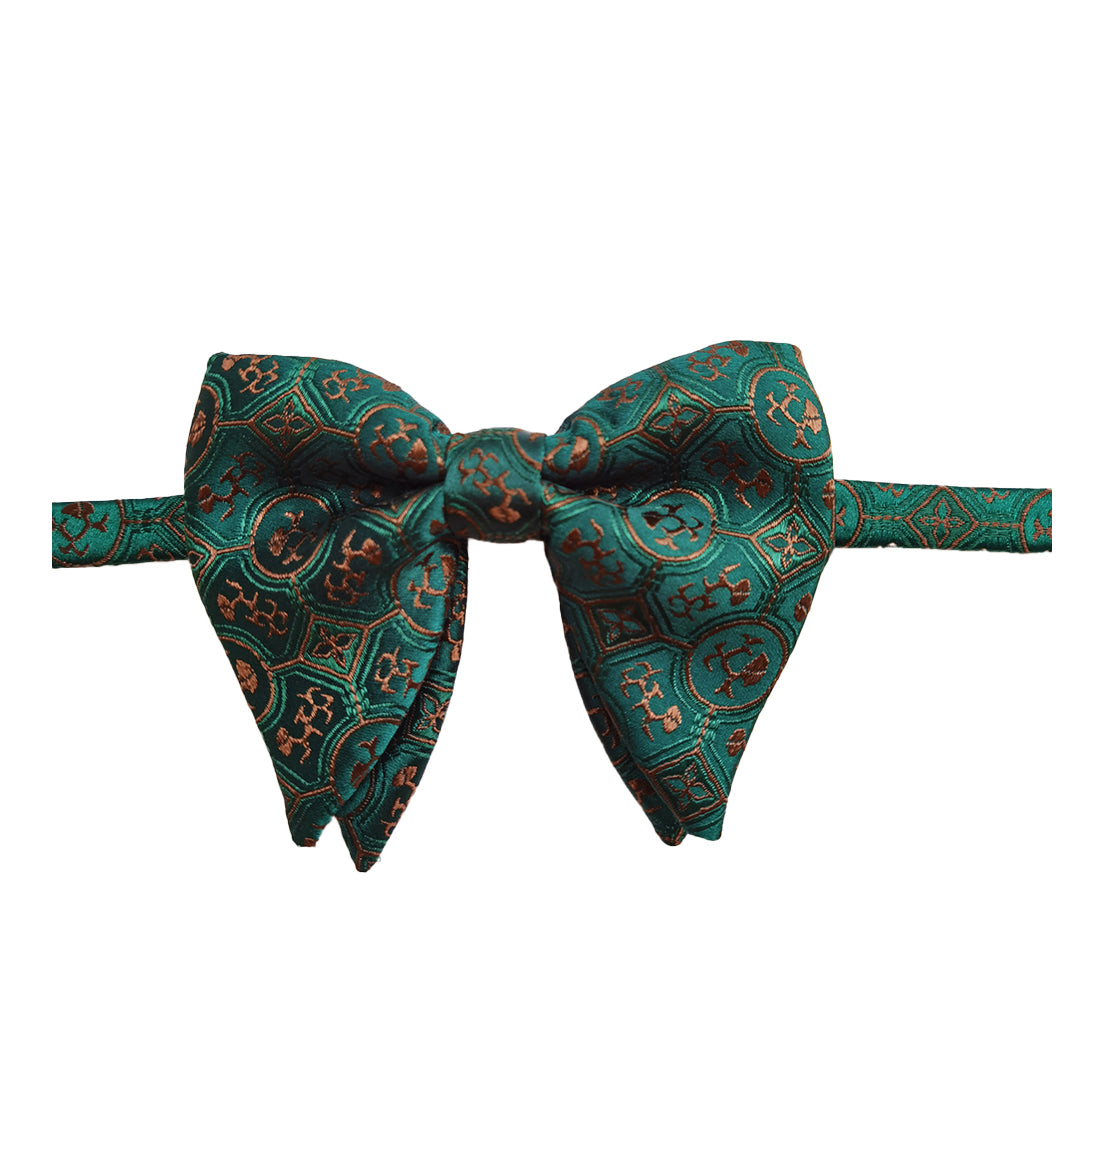 THE JING TAI G BOWTIE (BUTTERFLY)